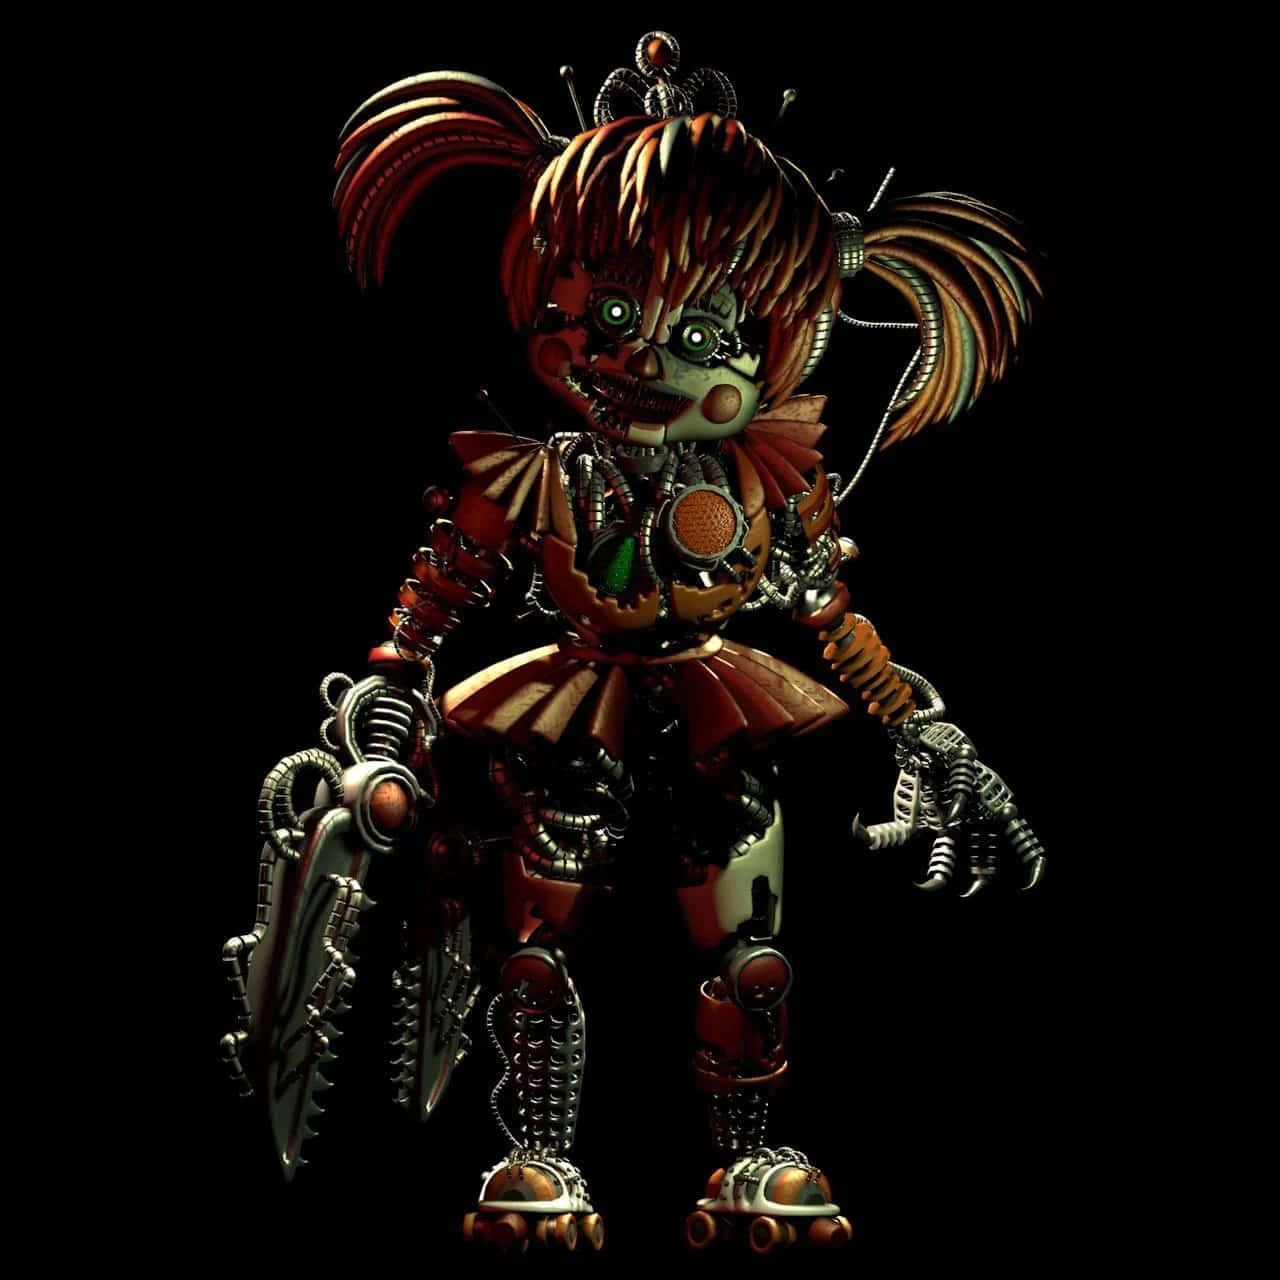 Enigmatic Scrap Baby from the FNAF Series Wallpaper